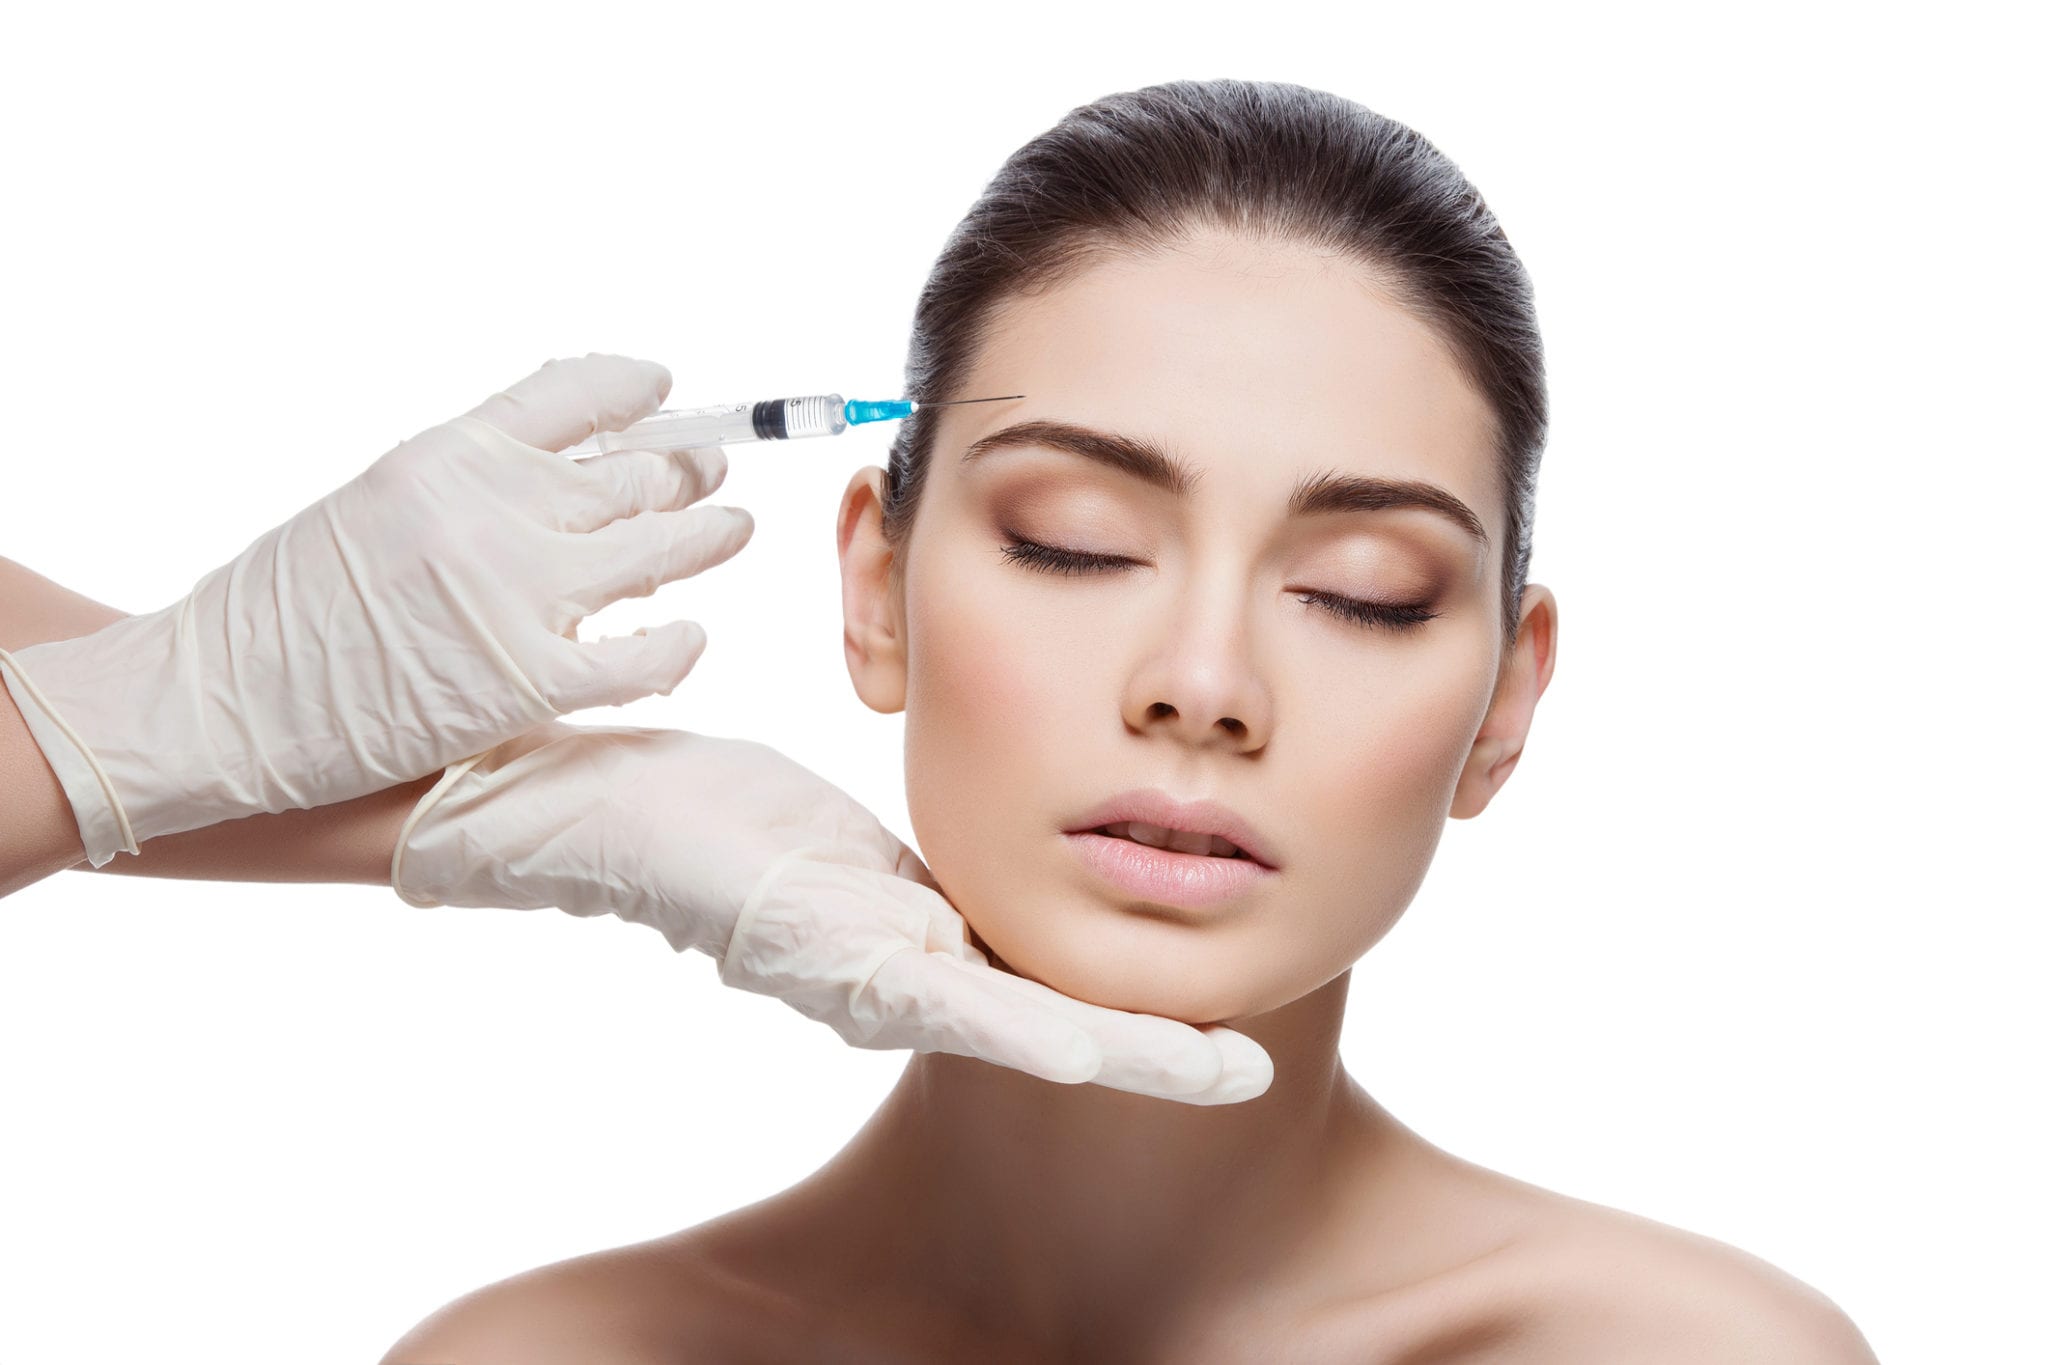 Complications of Botox injection